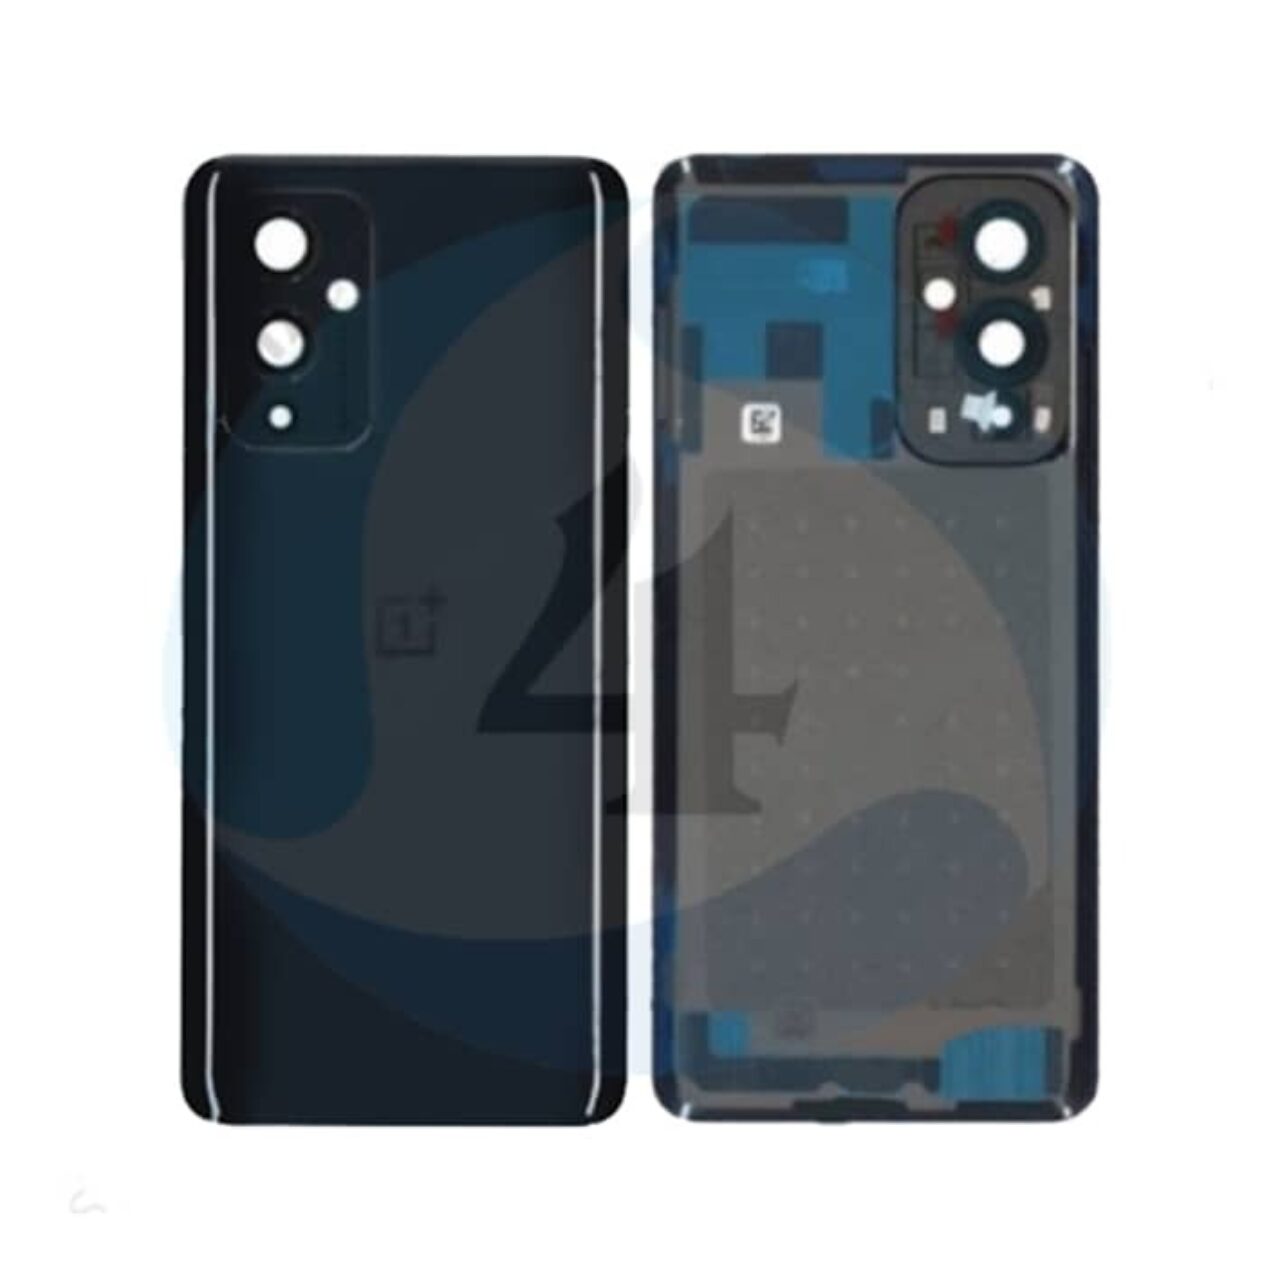 Backcover Black For One Plus 9 LE2113